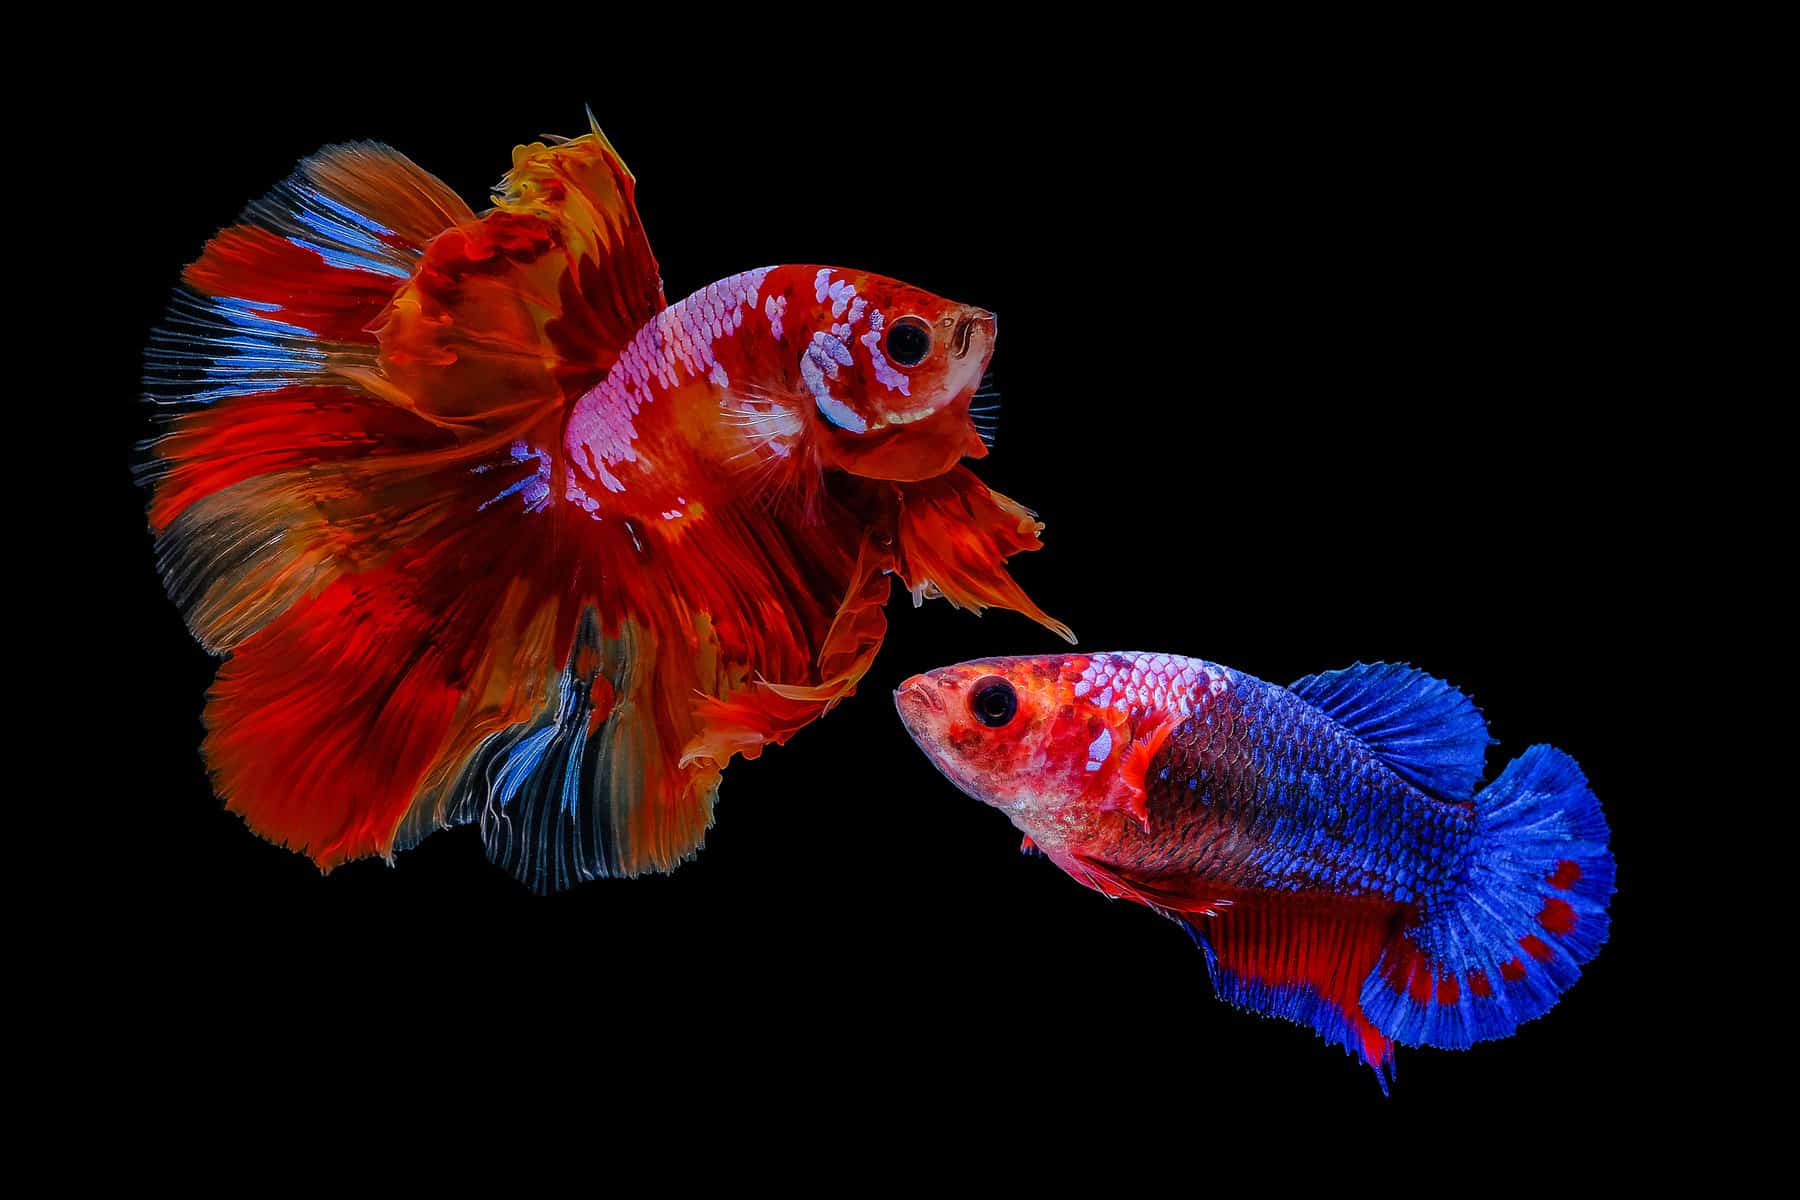 How To Identify Male And Female Fish